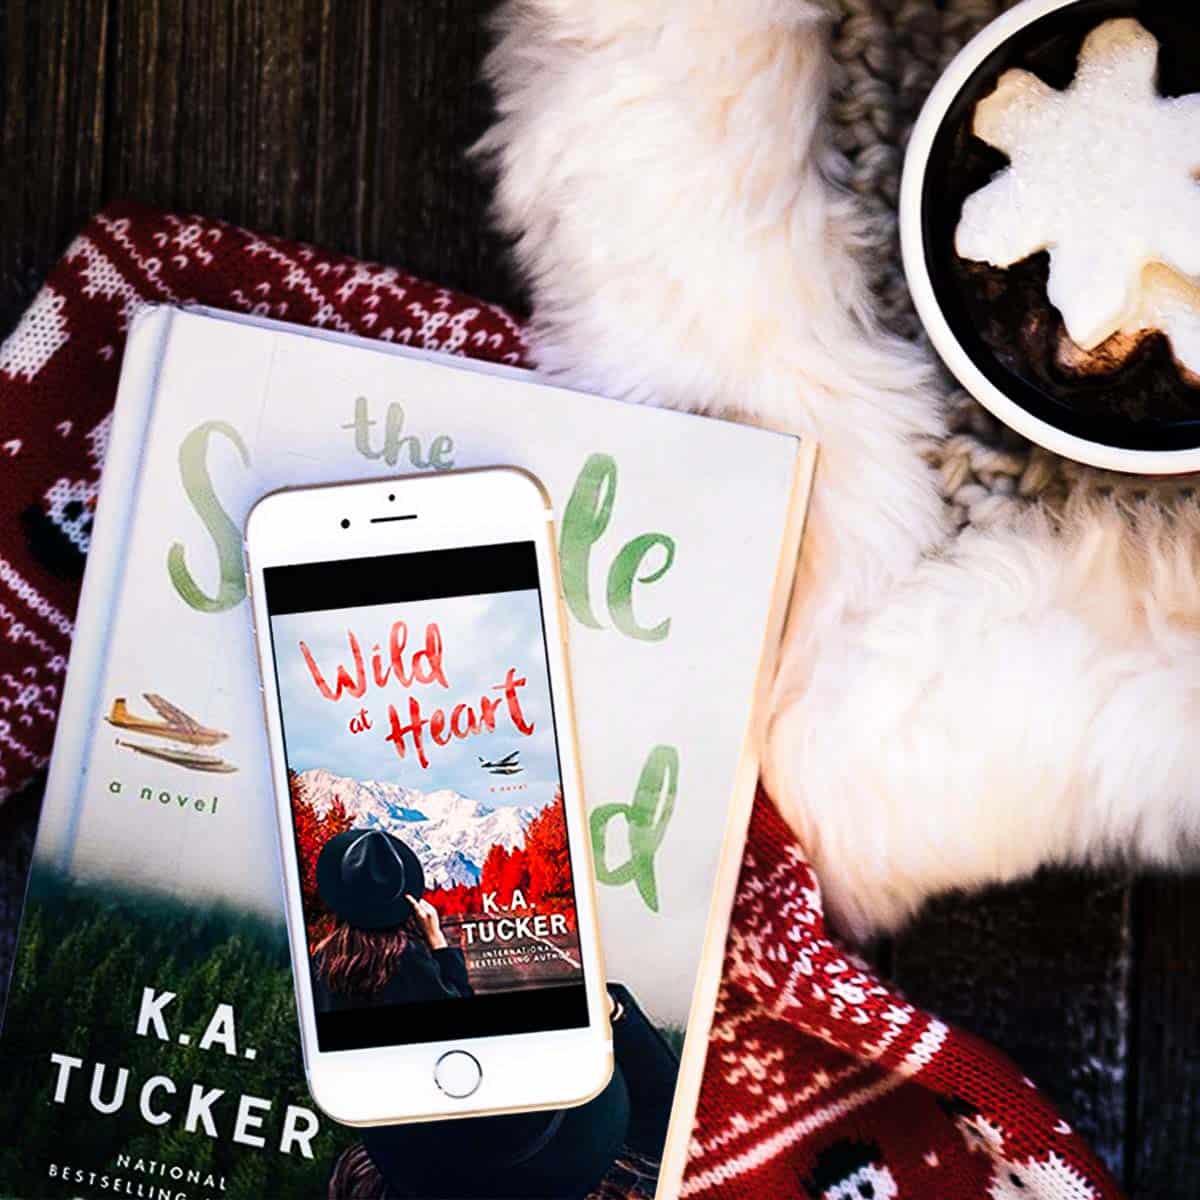 Wild at Heart by K.A. Tucker is the unforgettable sequel to The Simple Wild, a romance between an aimless 20-something and her rugged Alaskan bush pilot